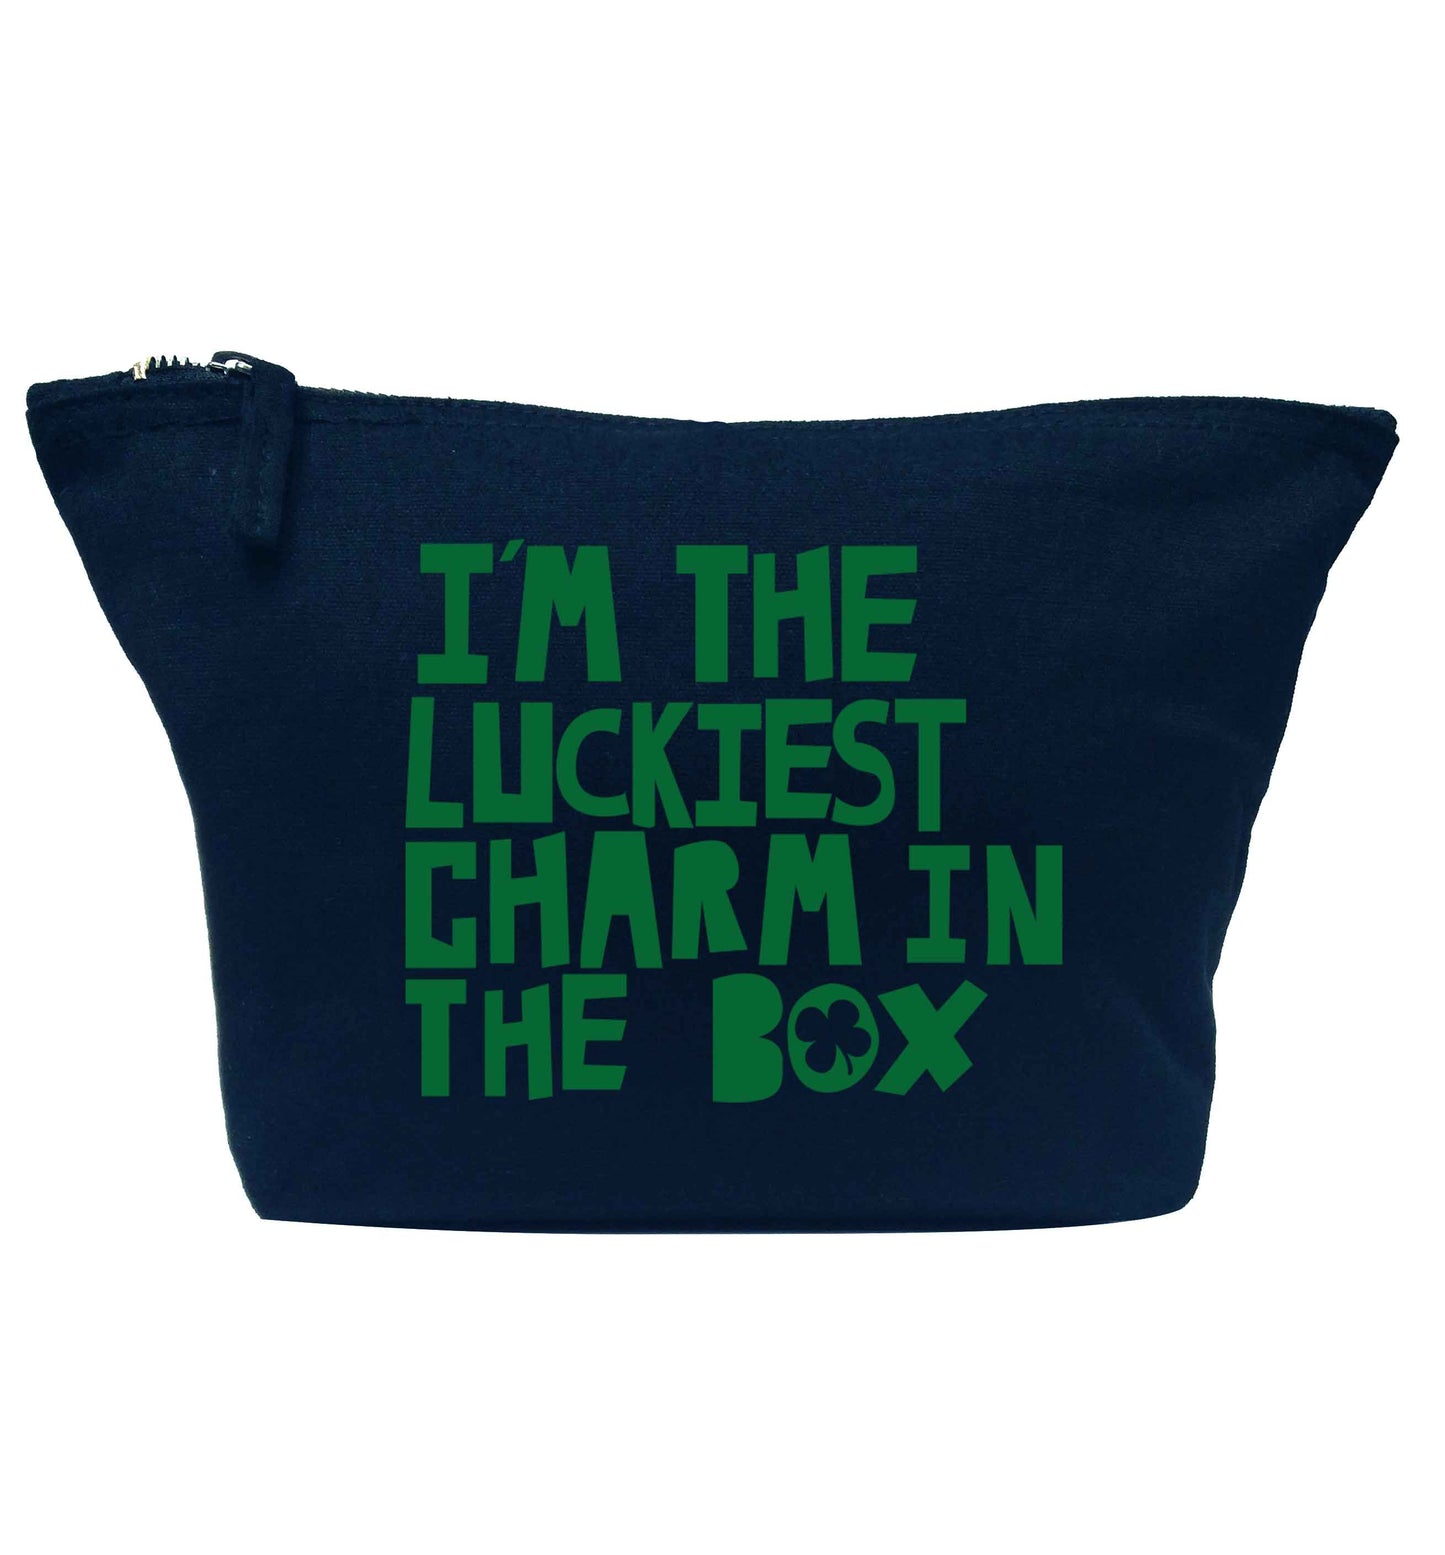 I'm the luckiest charm in the box navy makeup bag